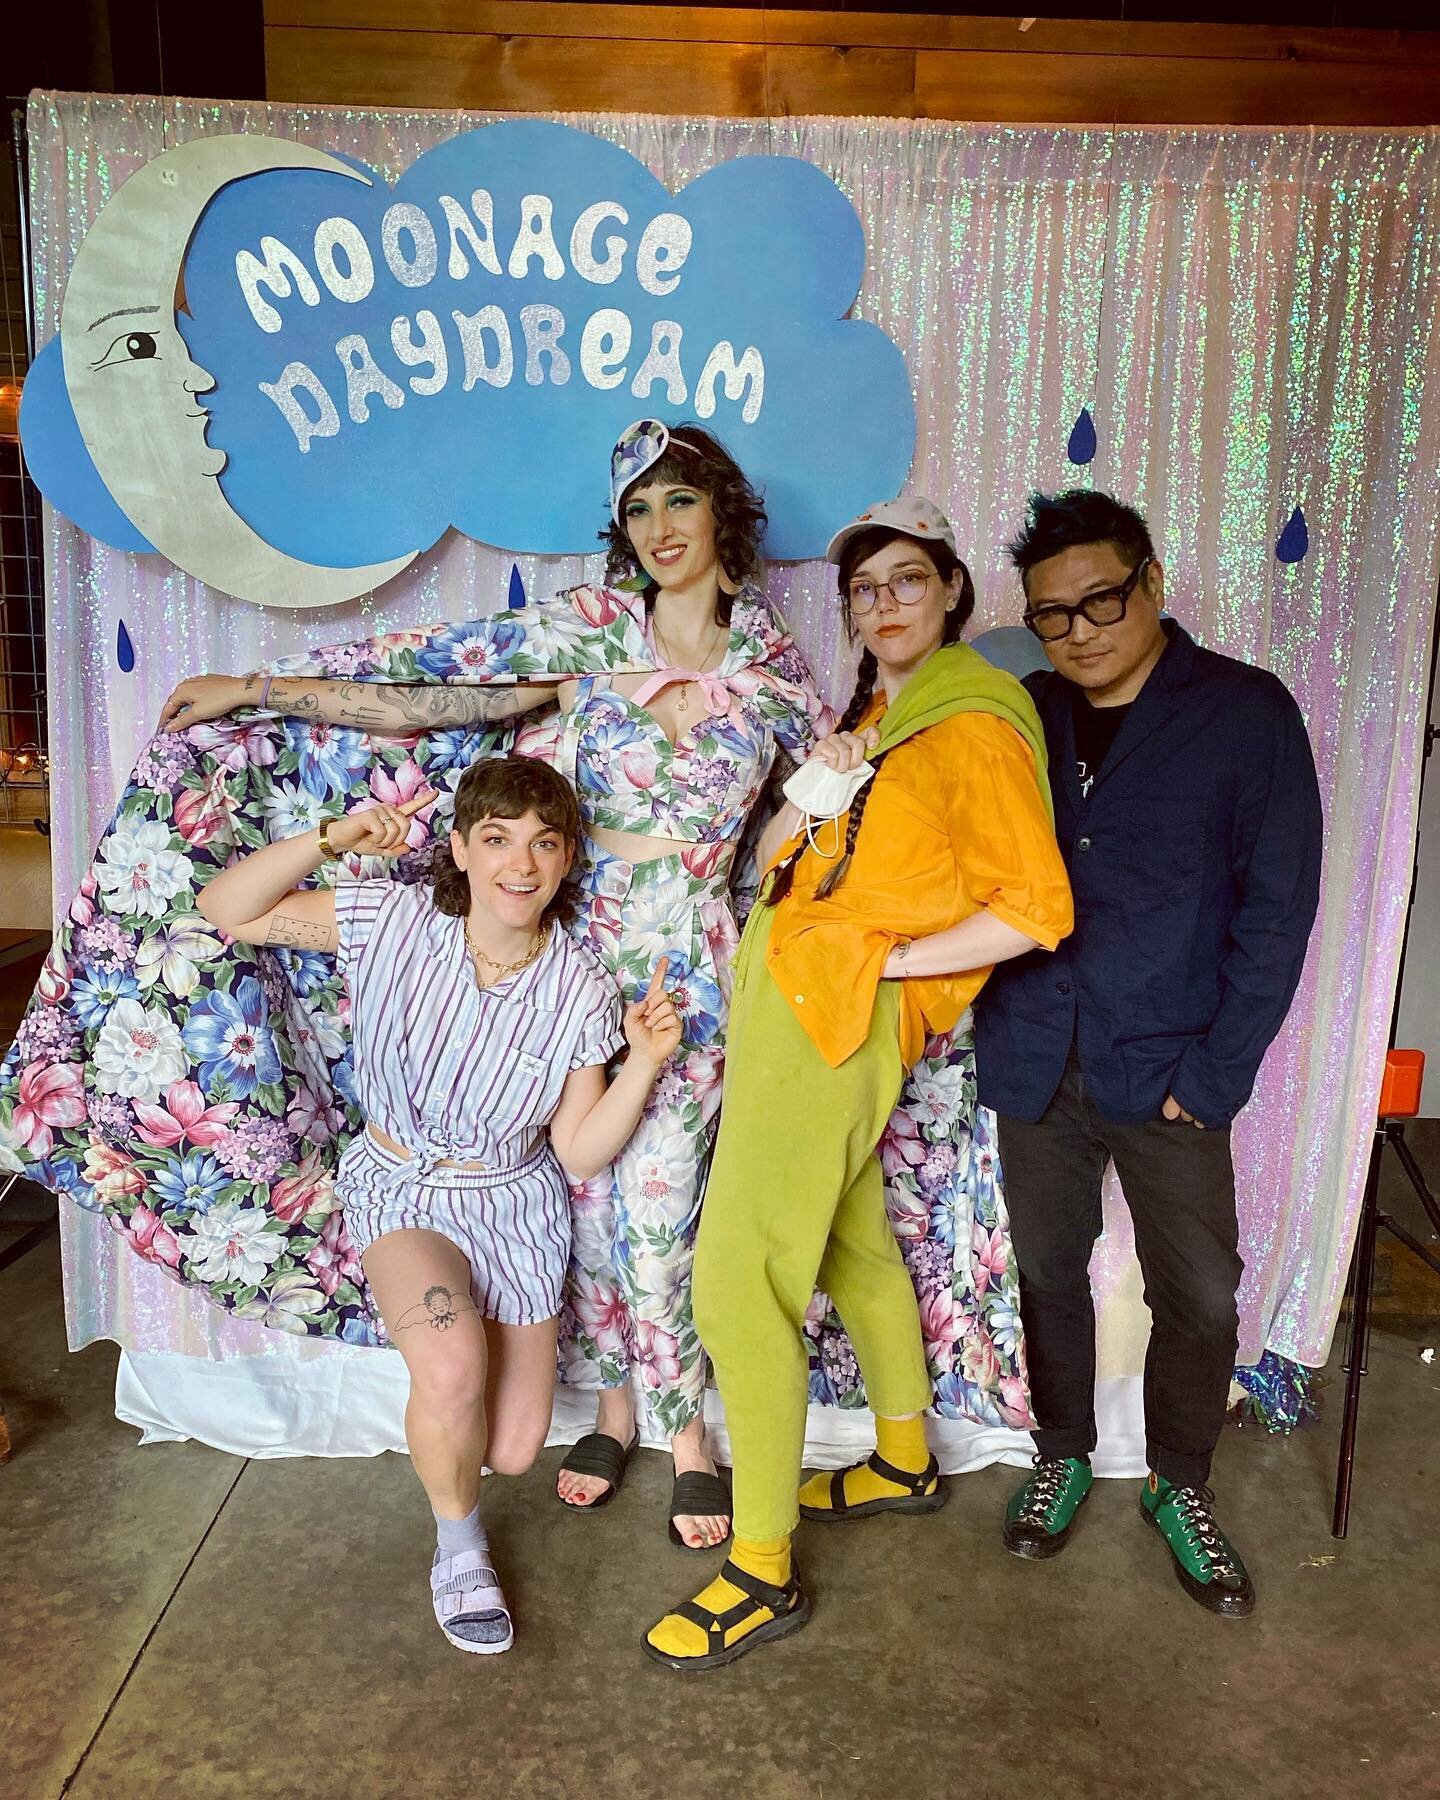 Dreamy reunion with some dreammates from @pinocchiomovie at the first of hopefully many @moonage_daydream_events 
☁️🩵☁️💚☁️💛☁️🧡☁️🩷☁️

Already scheming cozy separates for the next one&hellip;